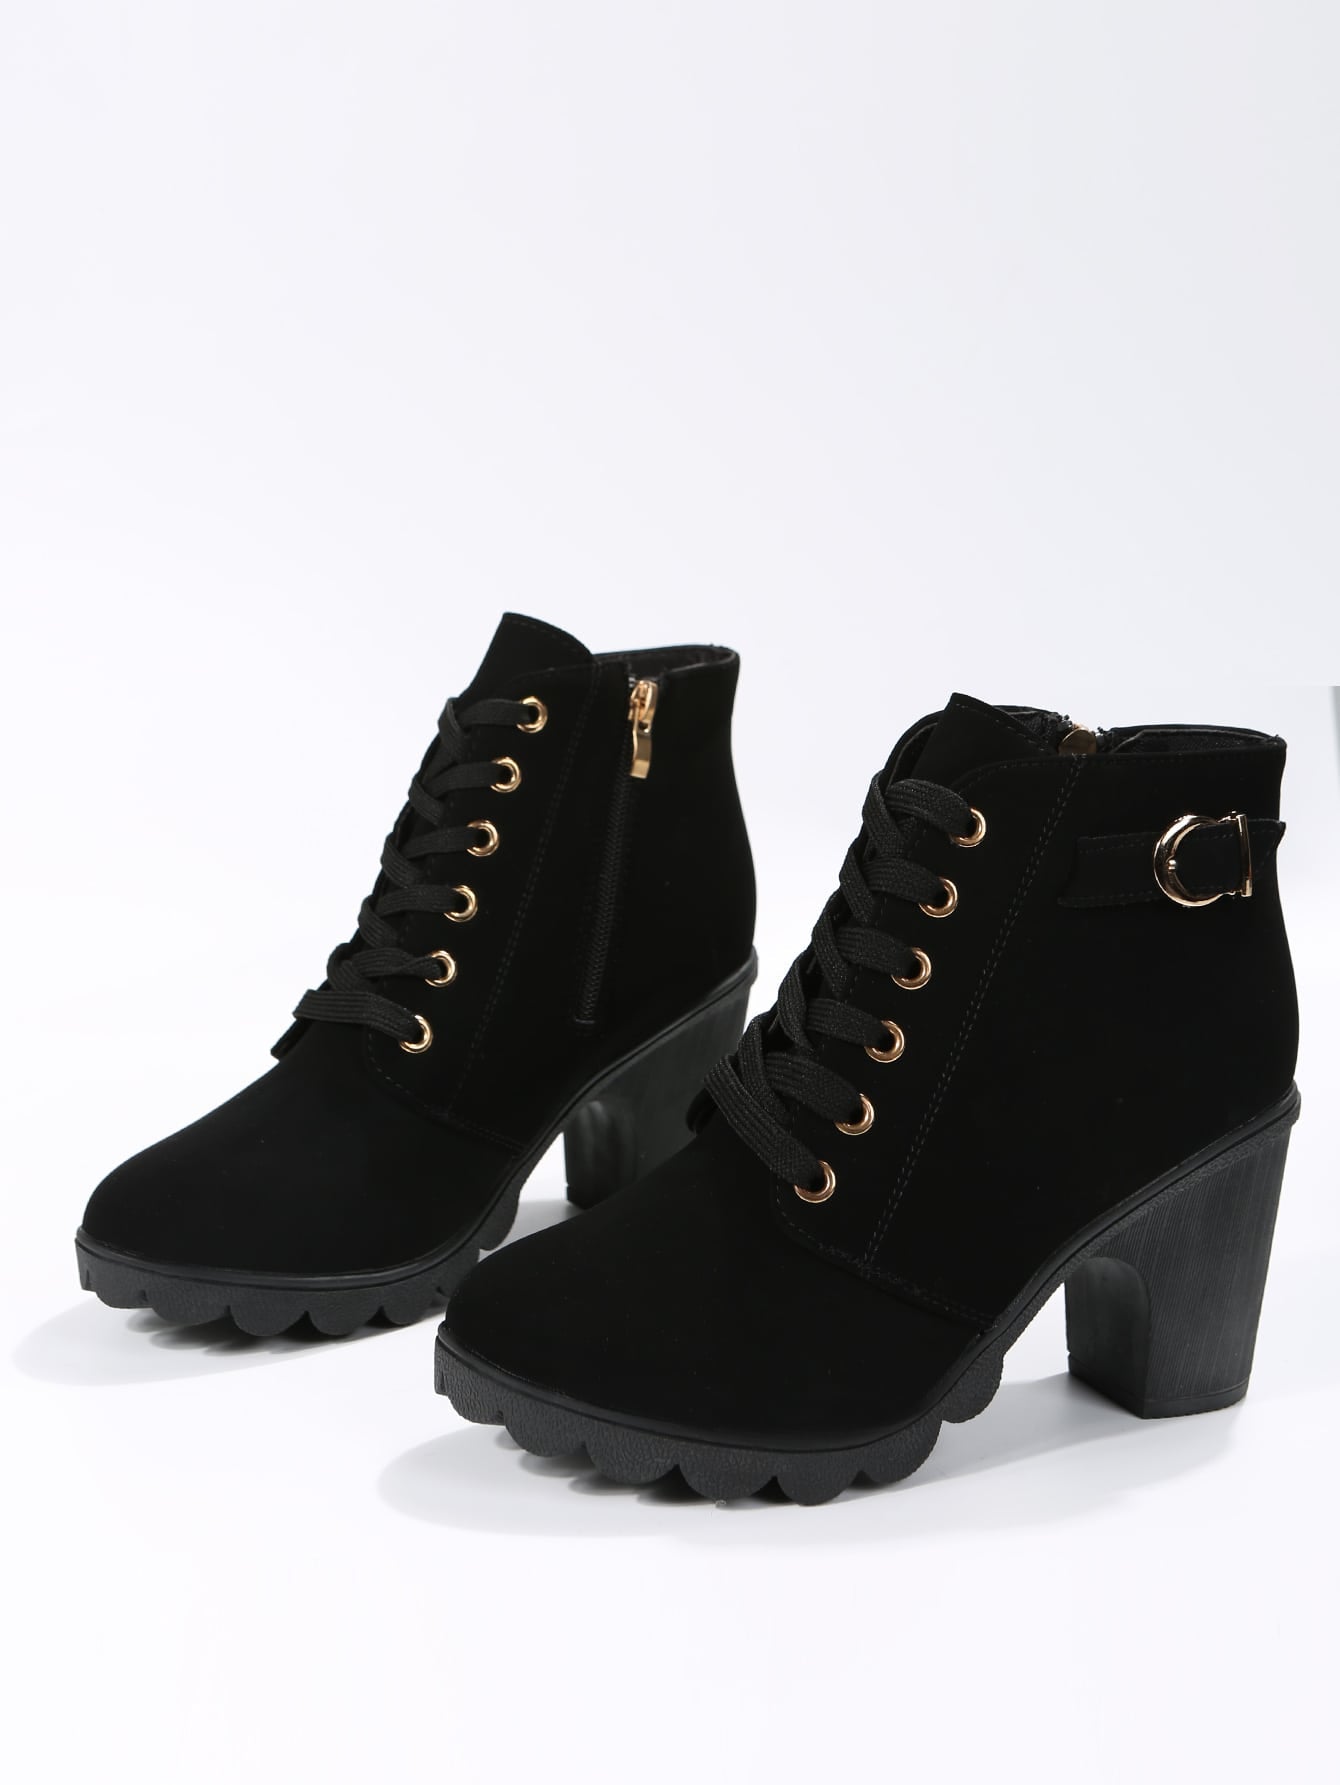 You Know You Want a Pair of High Heel Combat Boots Now - Racked